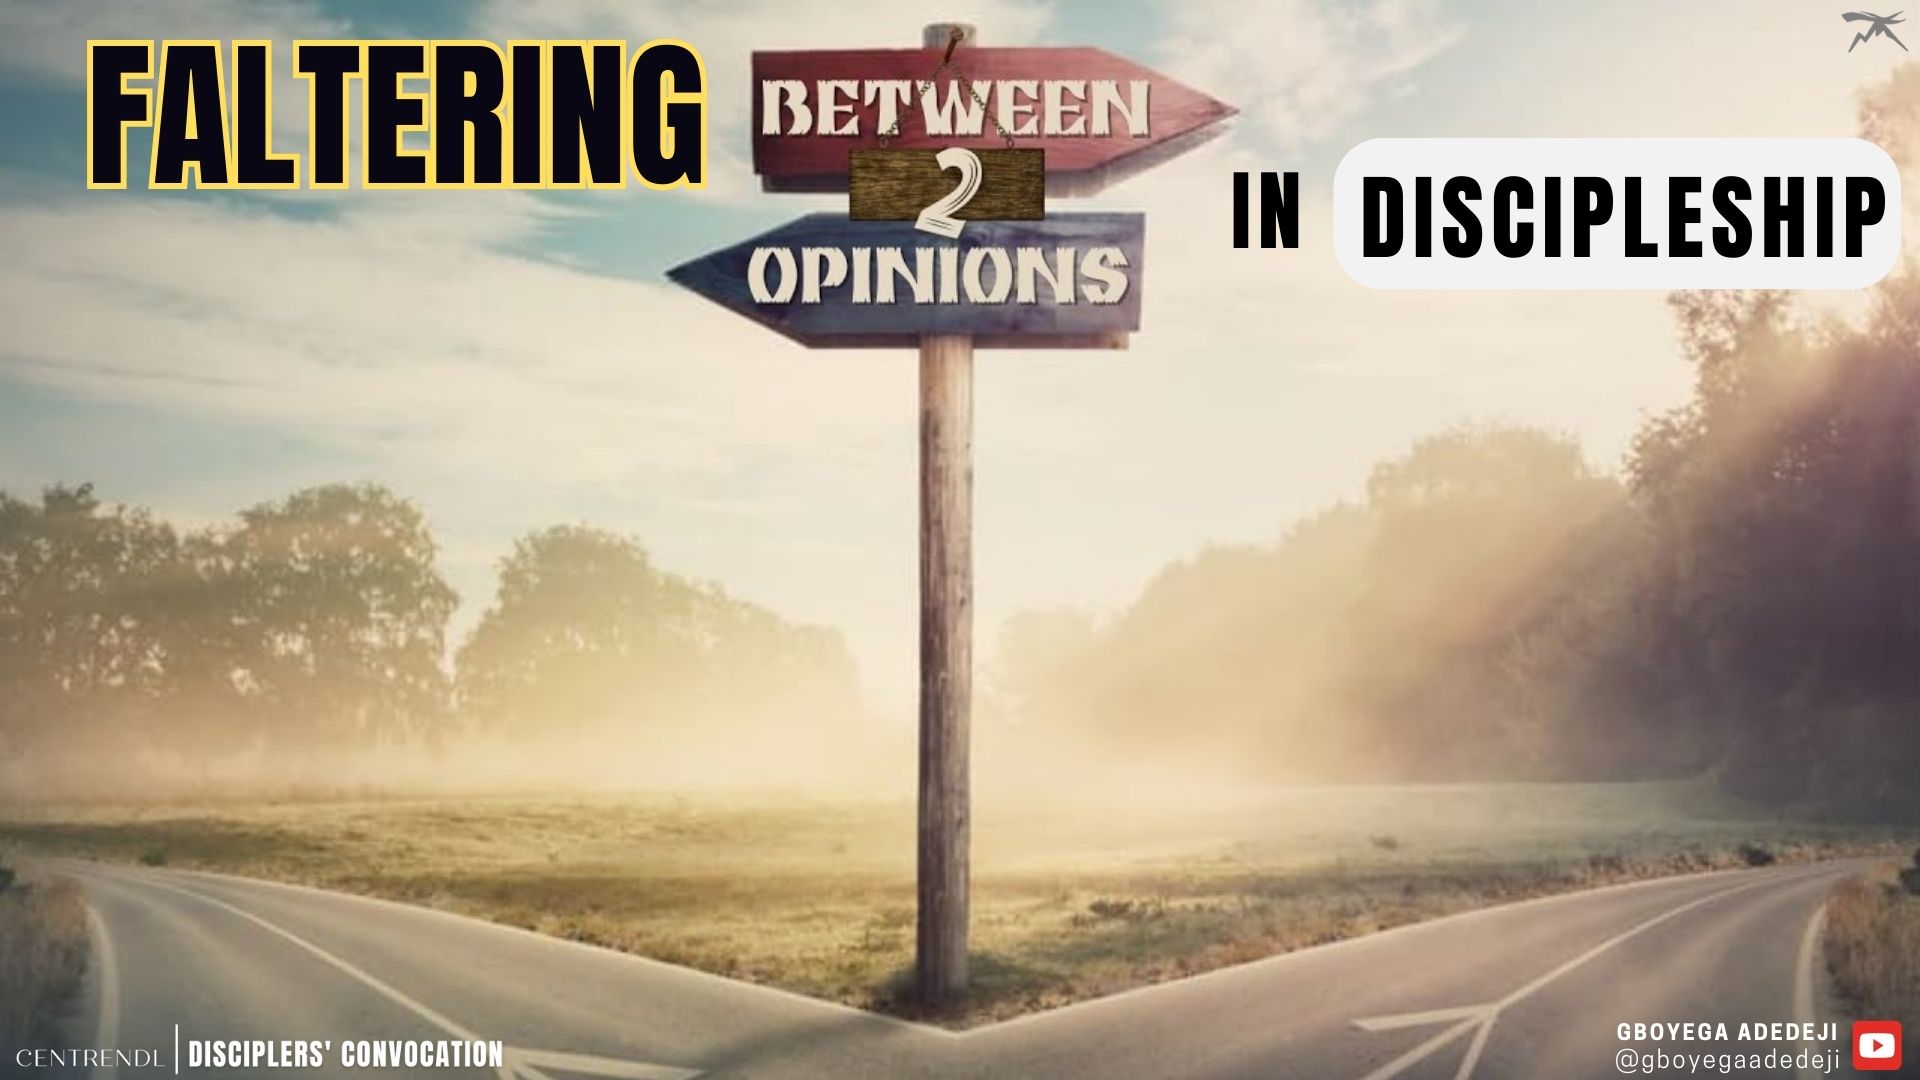 Being Between Two (2) Opinions In Discipleship